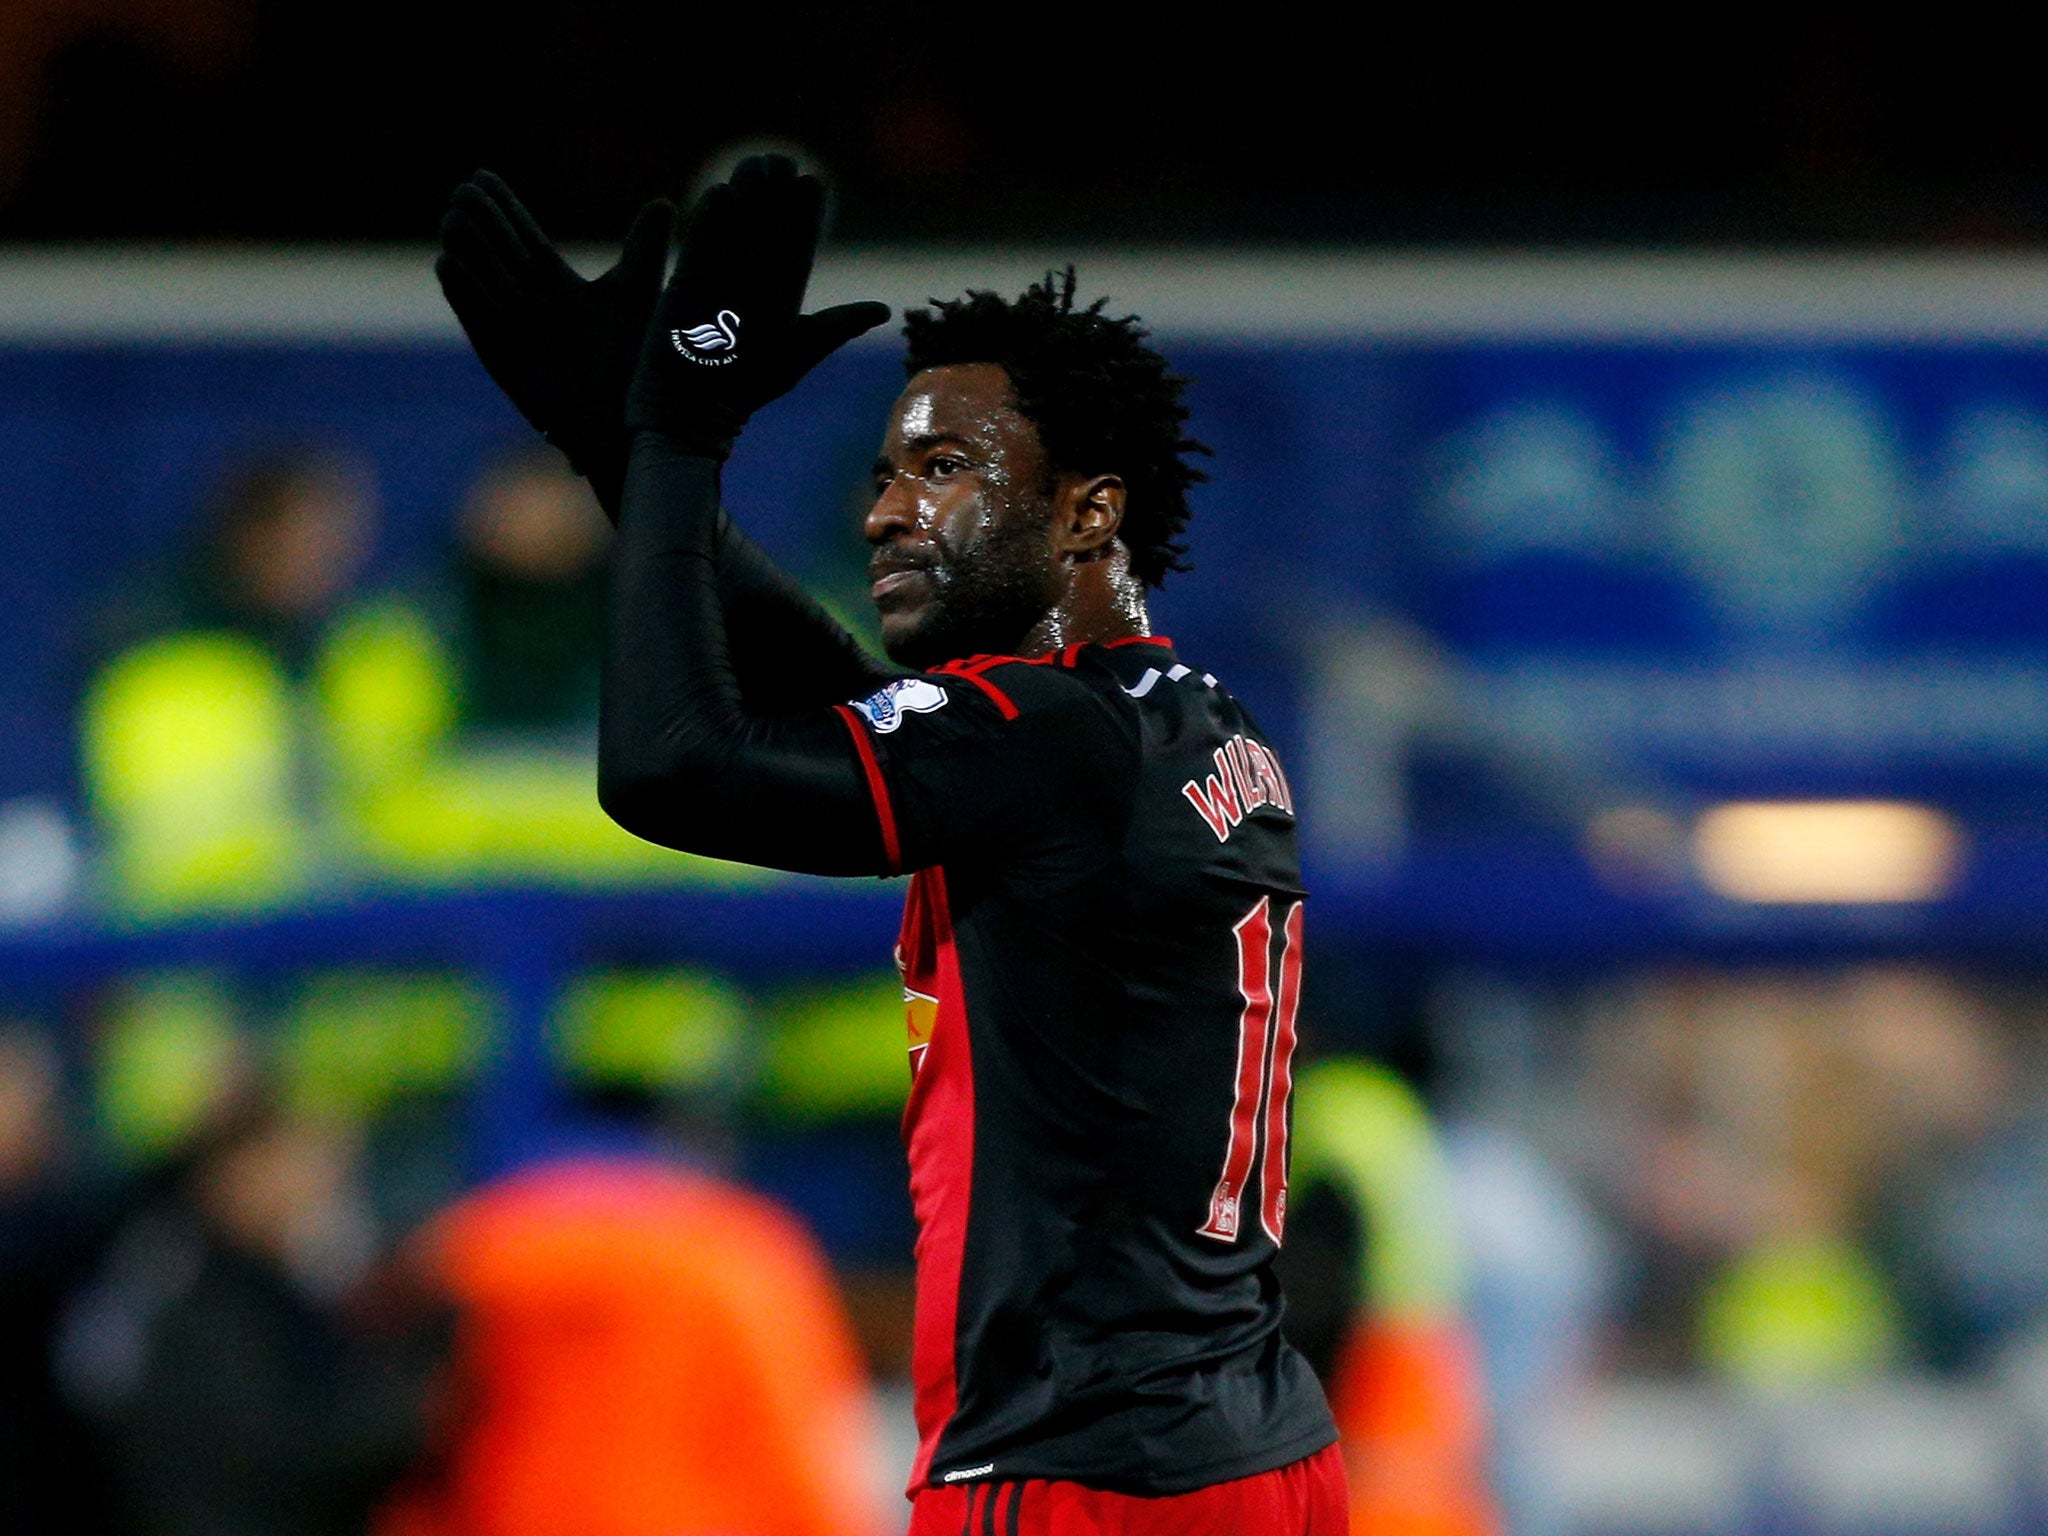 Wilfried Bony applauds the Swansea fans as he leaves the pitch